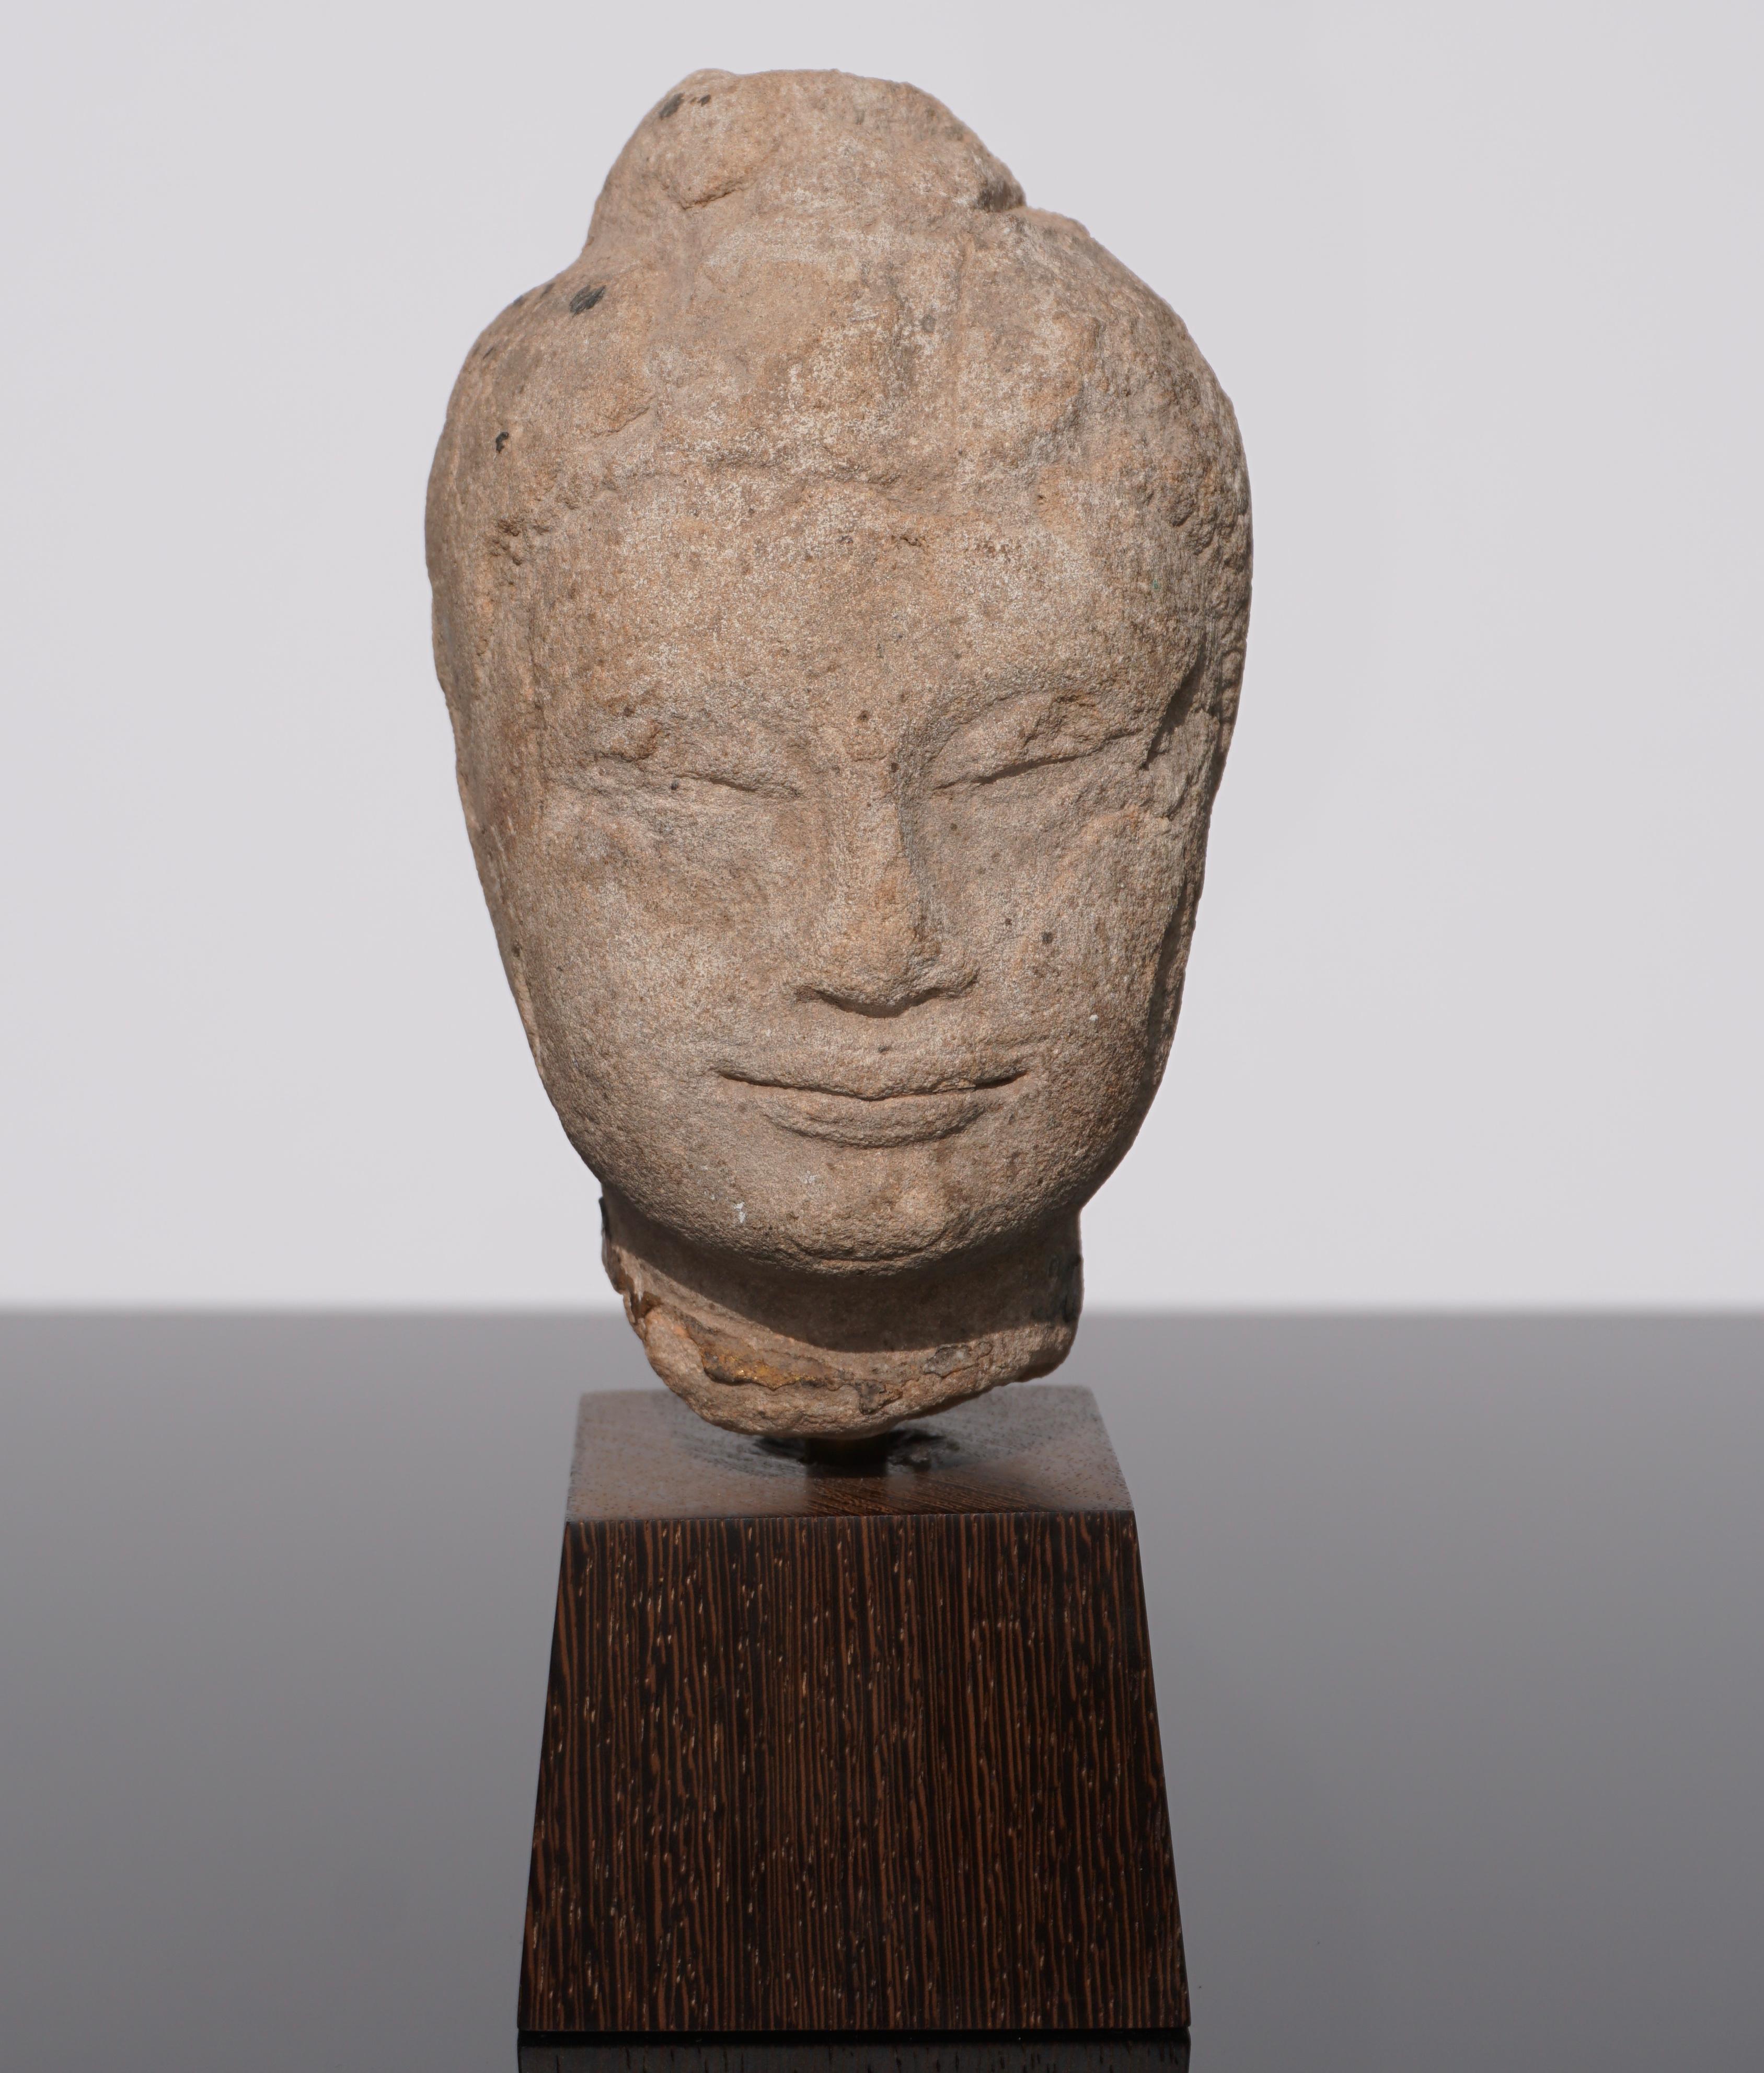 A very serene and calming weathered sandstone Buddha head from Thailand circa 16th century or earlier. Traces of thick gold gilding on neck. I love the feeling this Buddha sculpture figure evokes!

Head: 6 x 4 x 3.75 inches
With Stand: 8.25